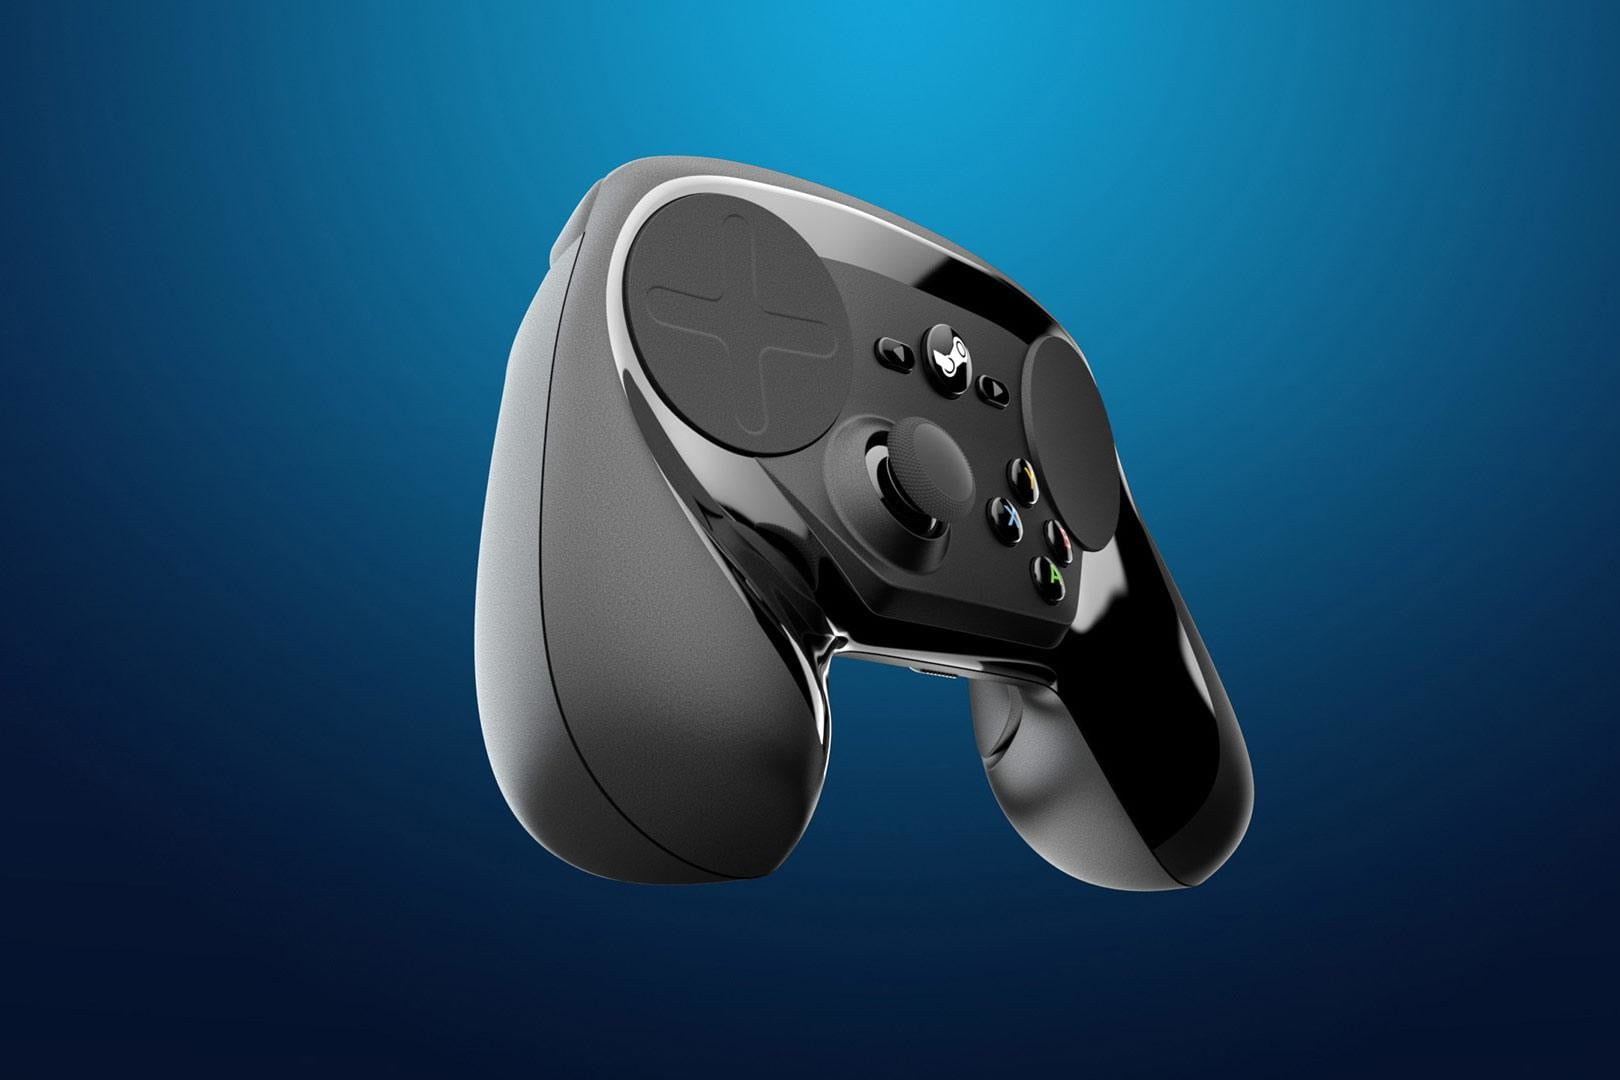 Steam Link - Apps on Google Play